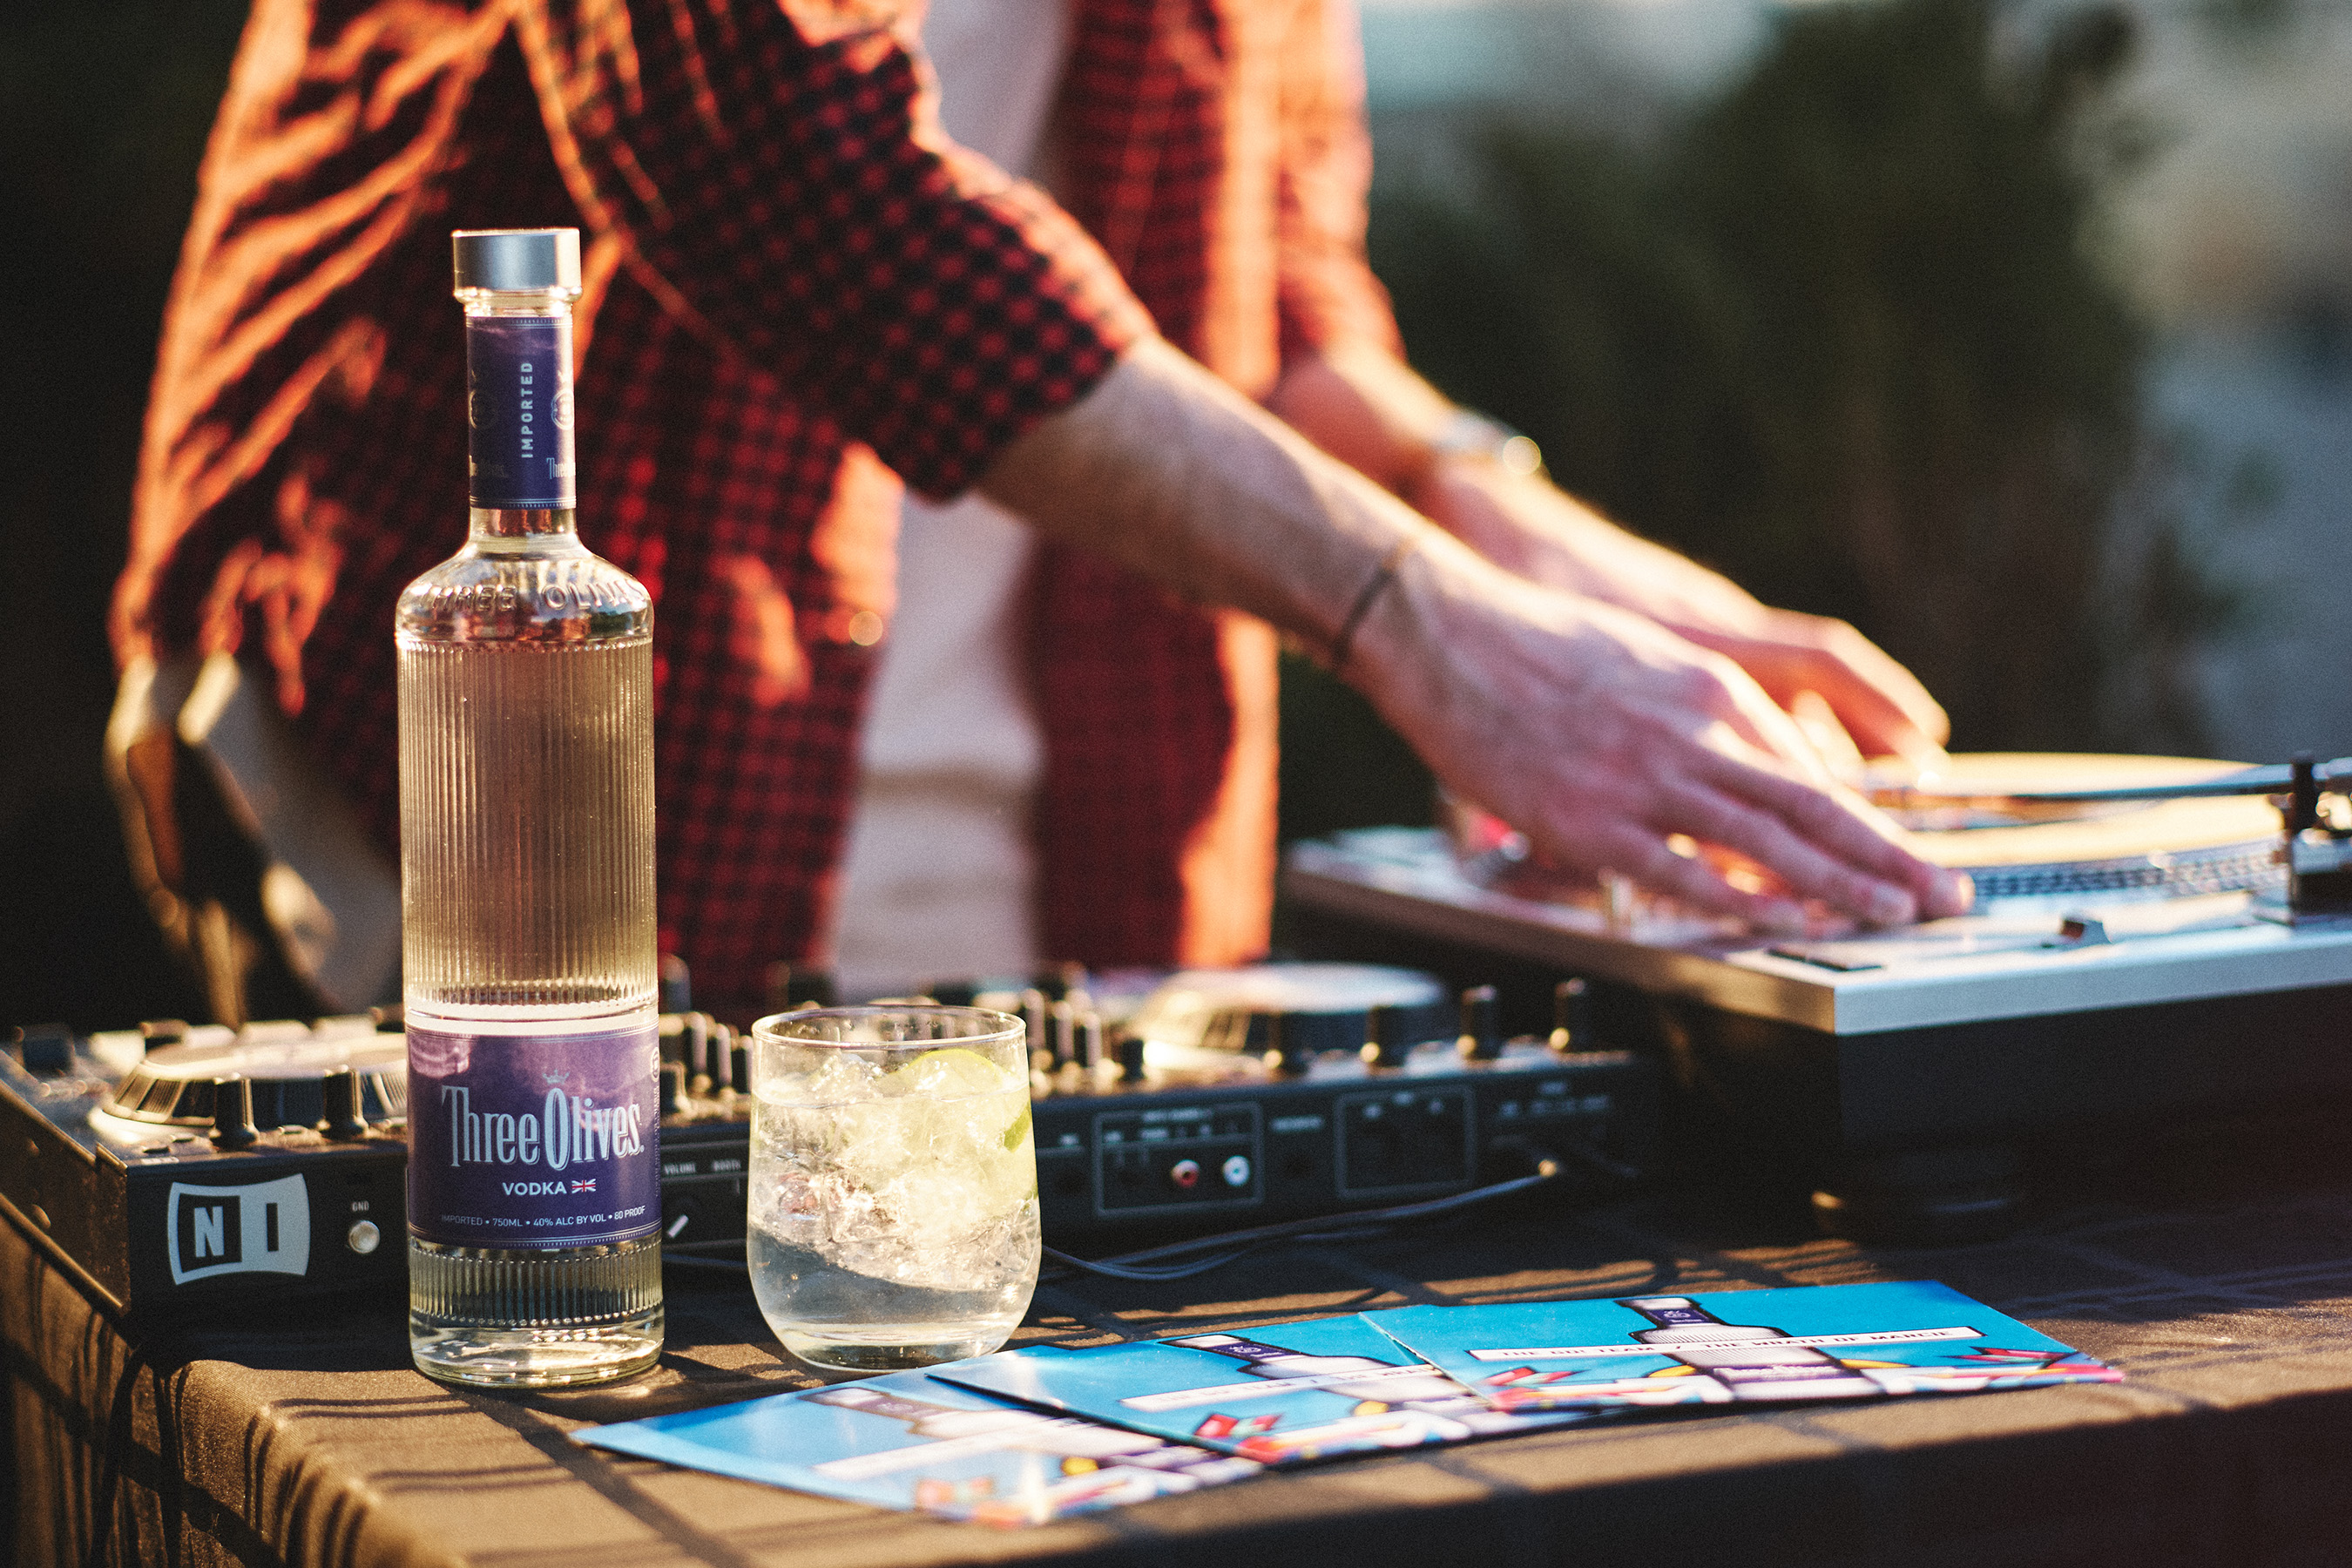 Three Olives Vodka introduces “Find Otherness,” a new campaign platform that celebrates those who believe a playful spirit of eccentricity makes life more exciting.